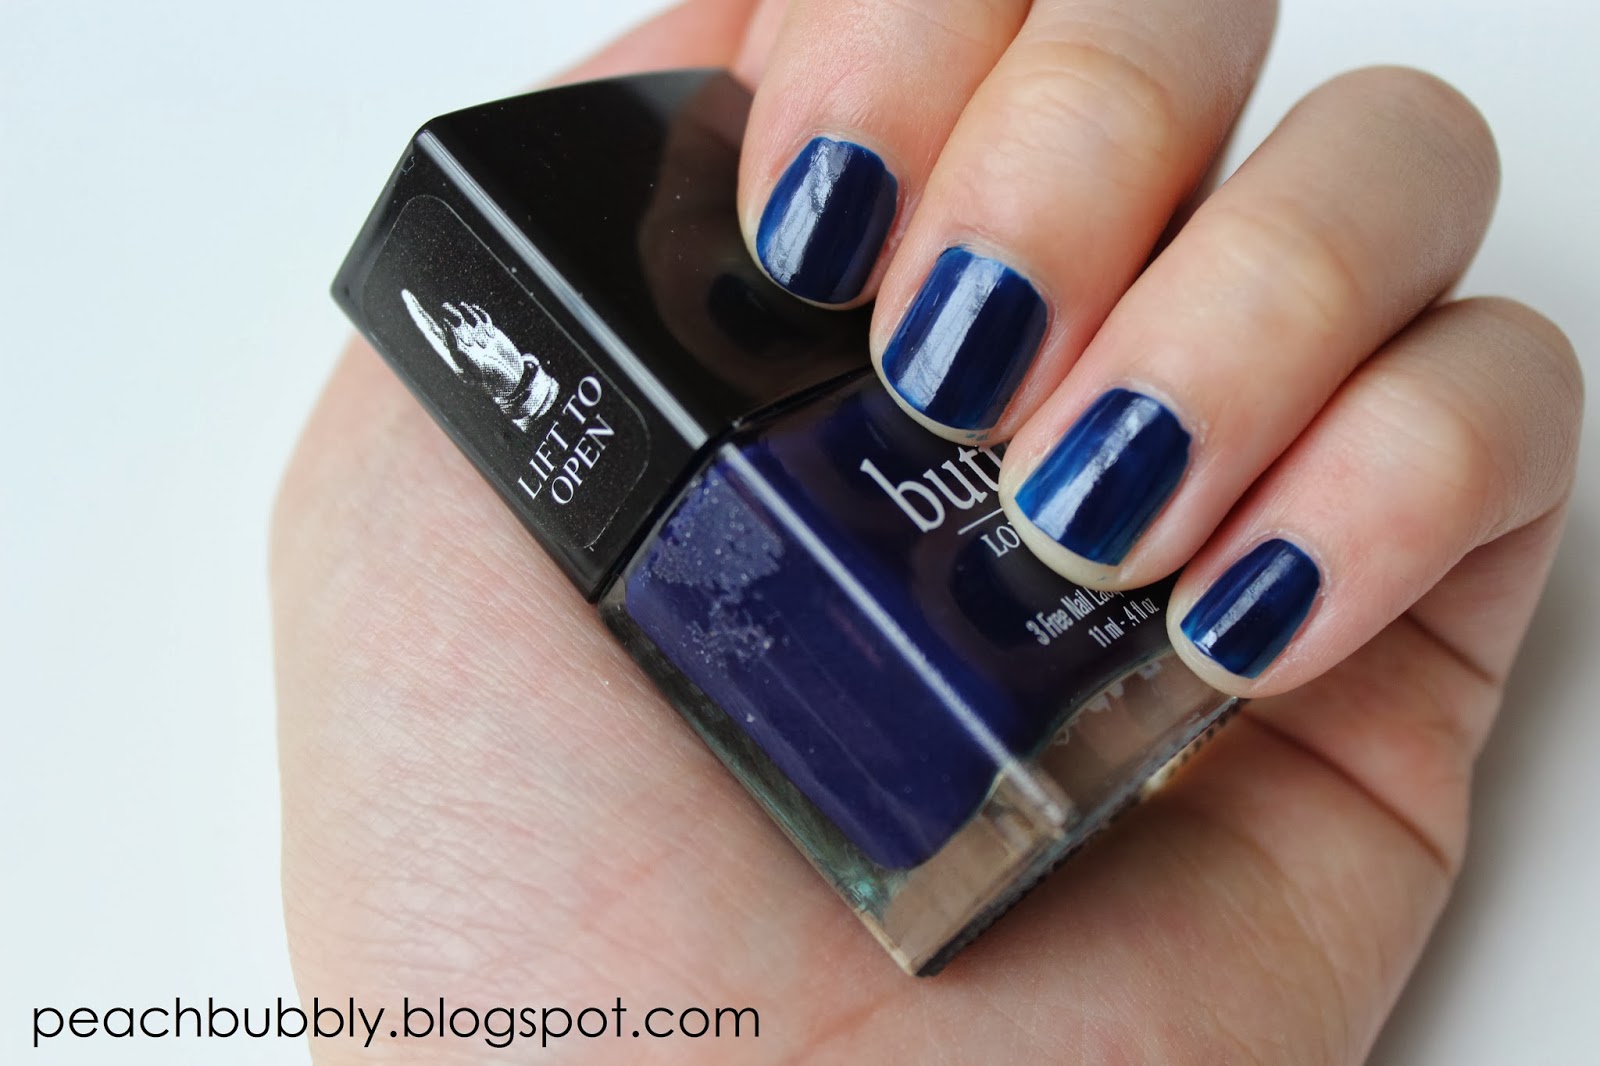 9. Butter London Royal Navy - wide 1